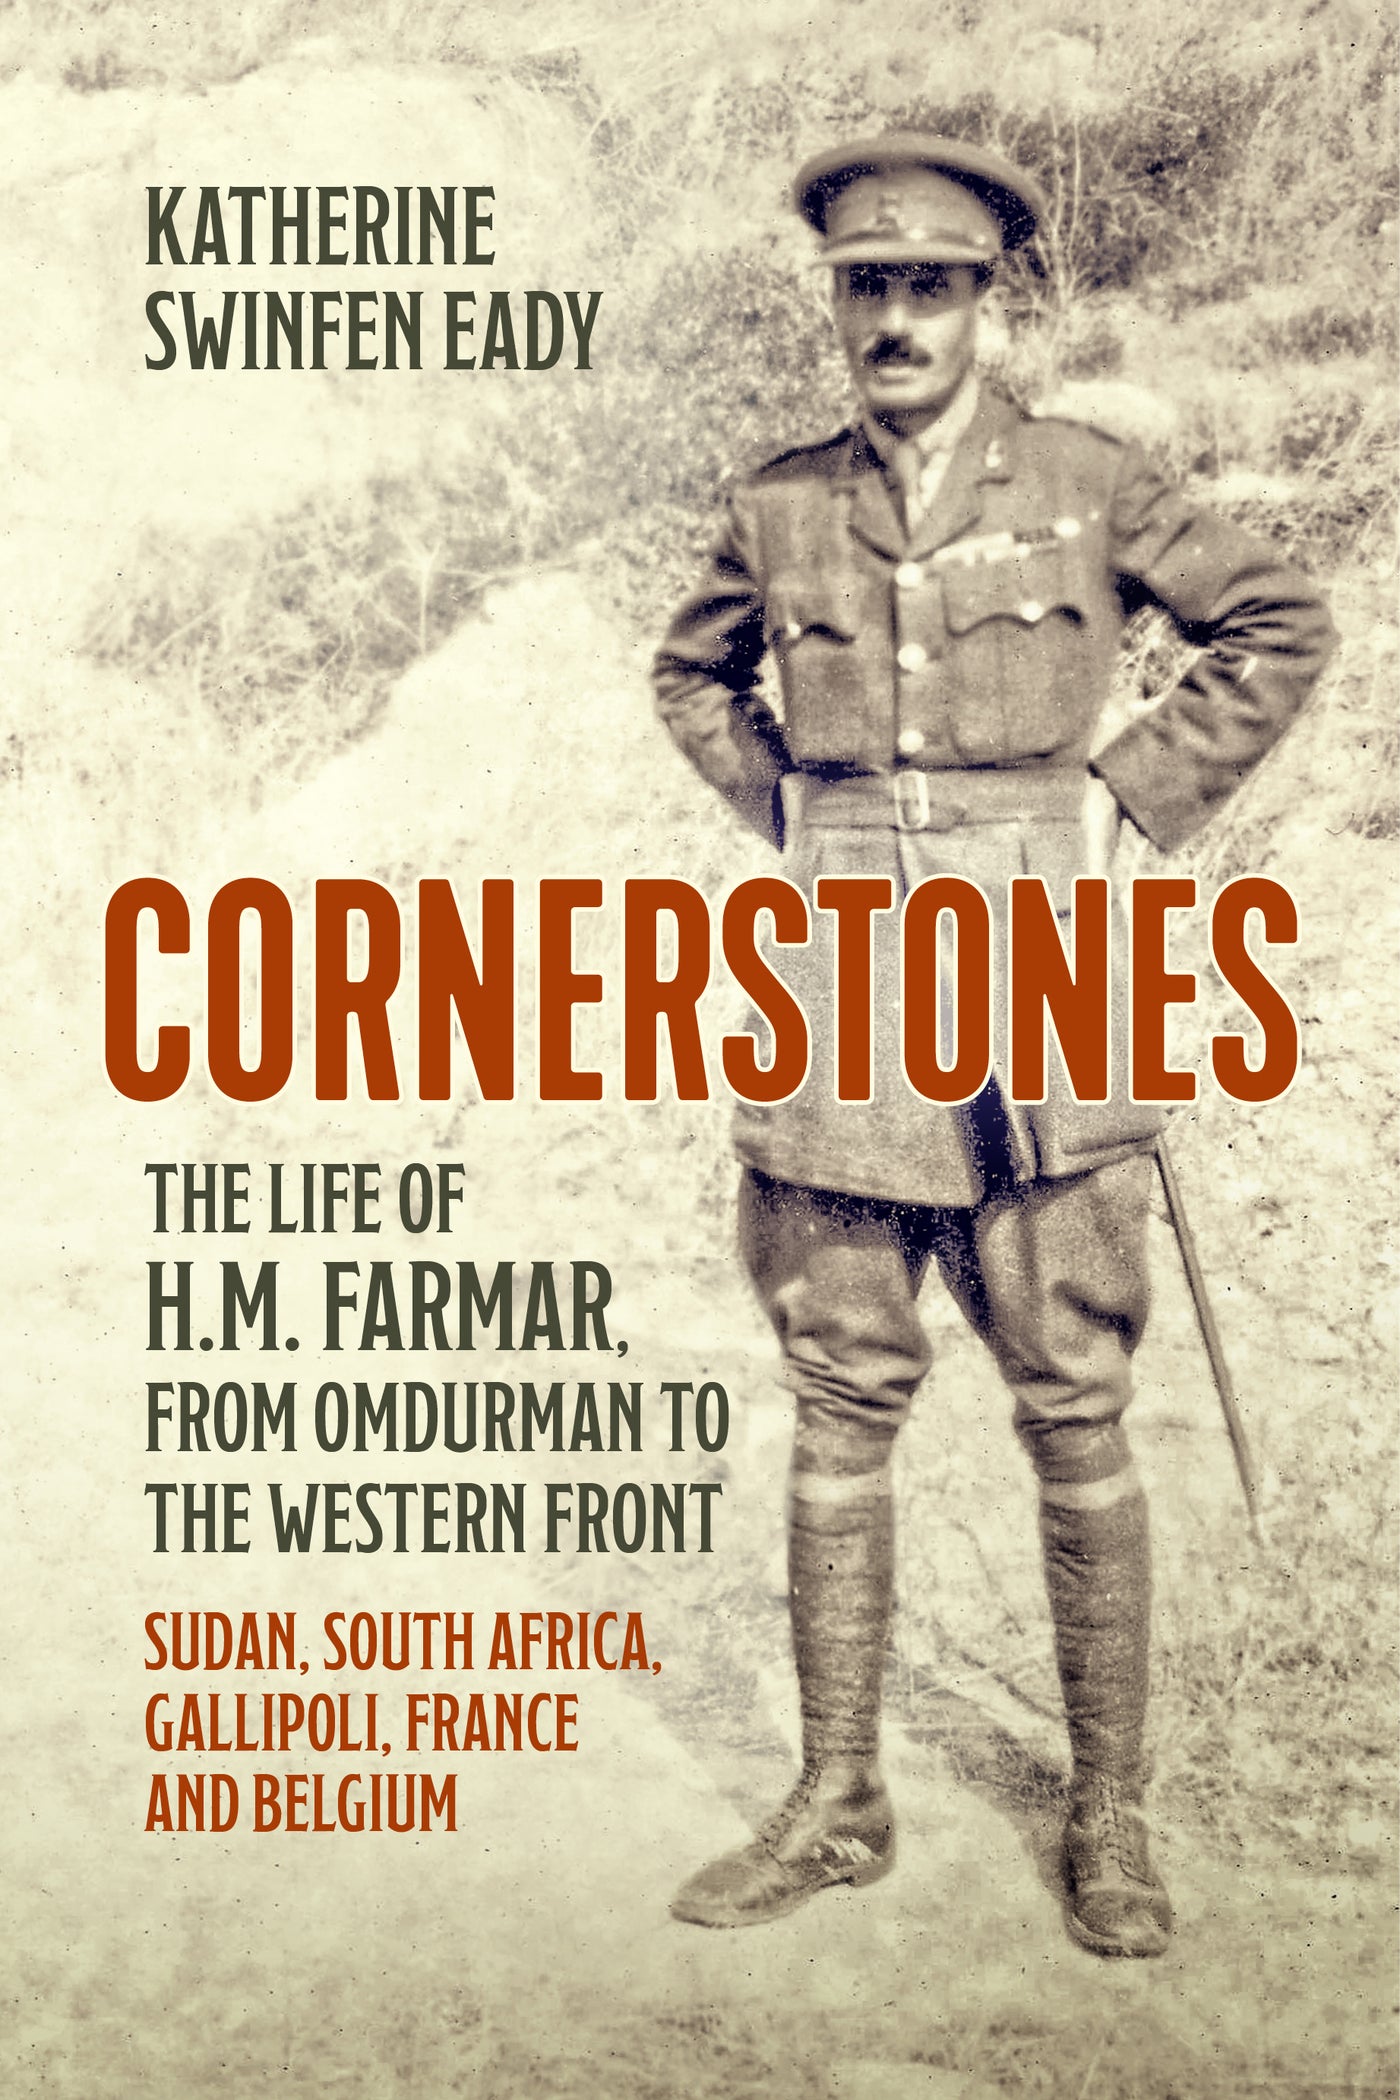 Cornerstones: The Life of H.M. Farmar, from Omdurman to the Western Front